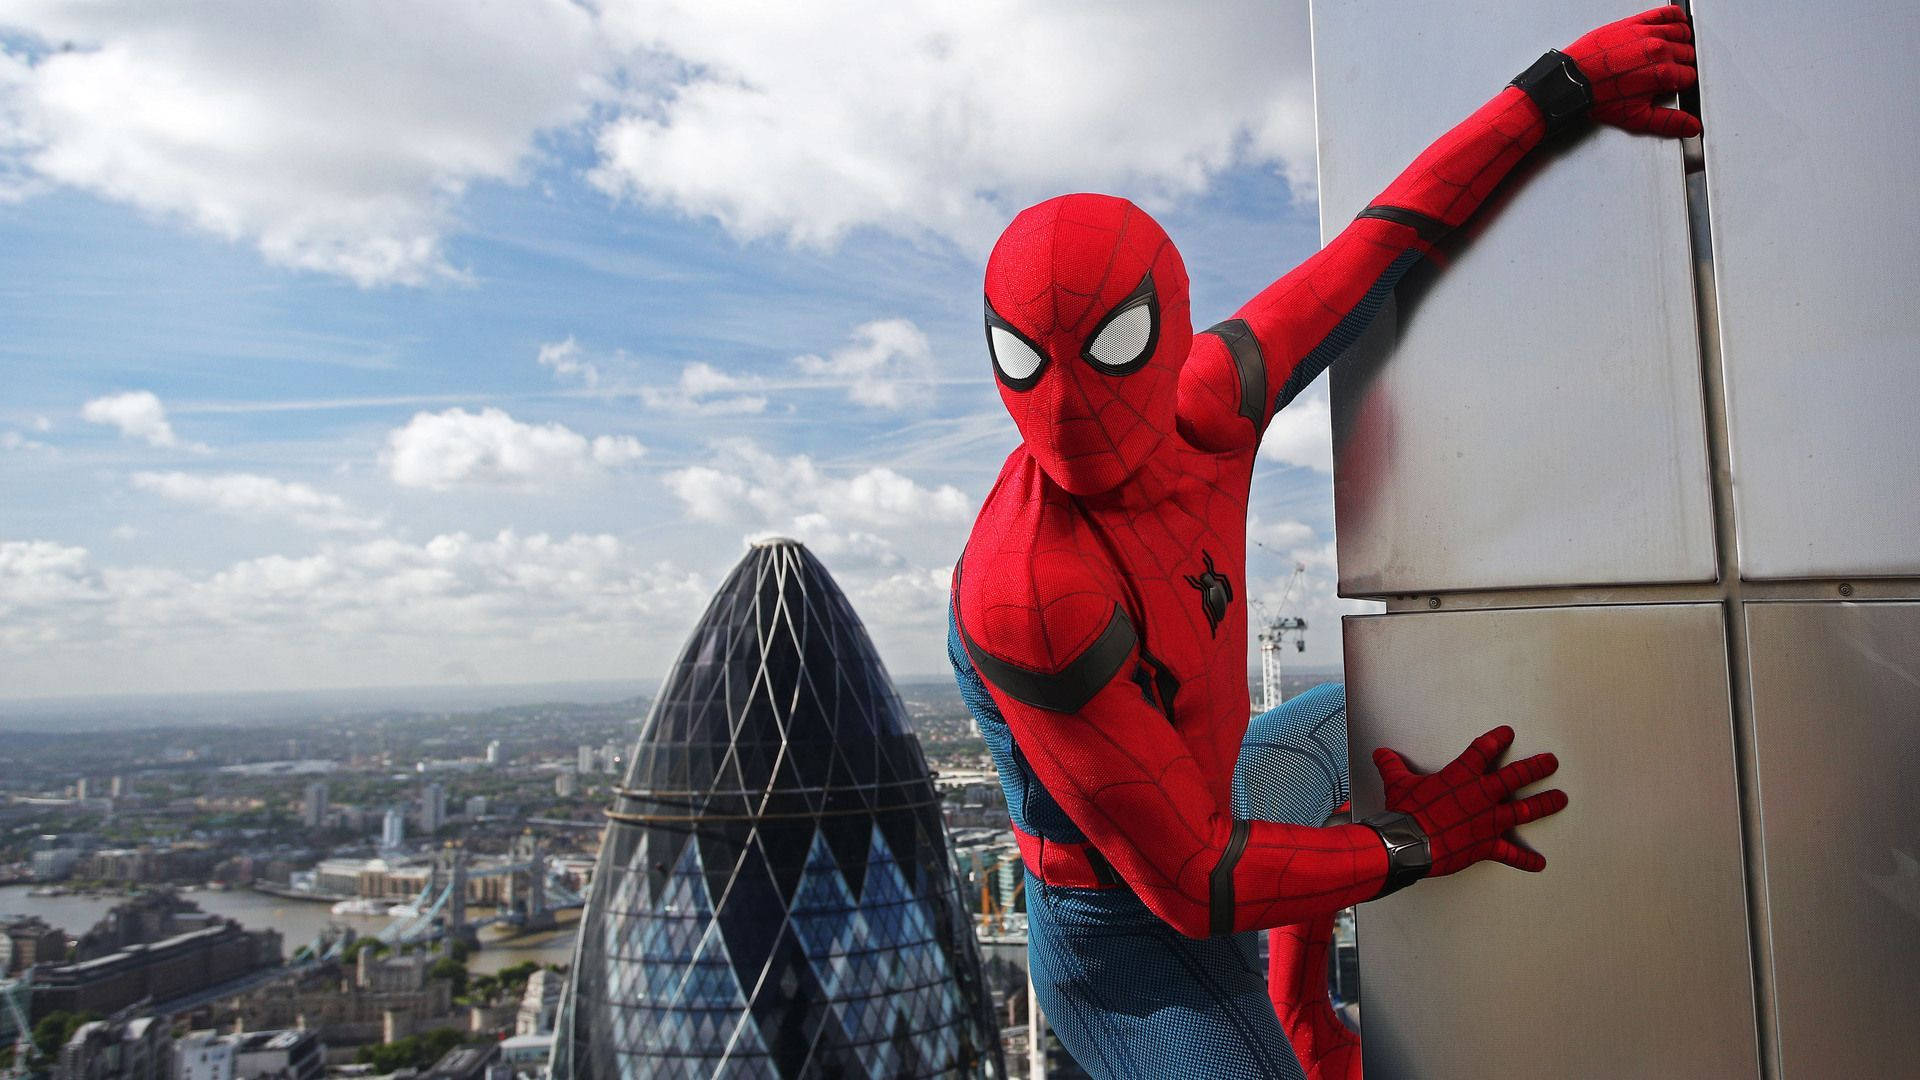 Spiderman And Gherkin Tower